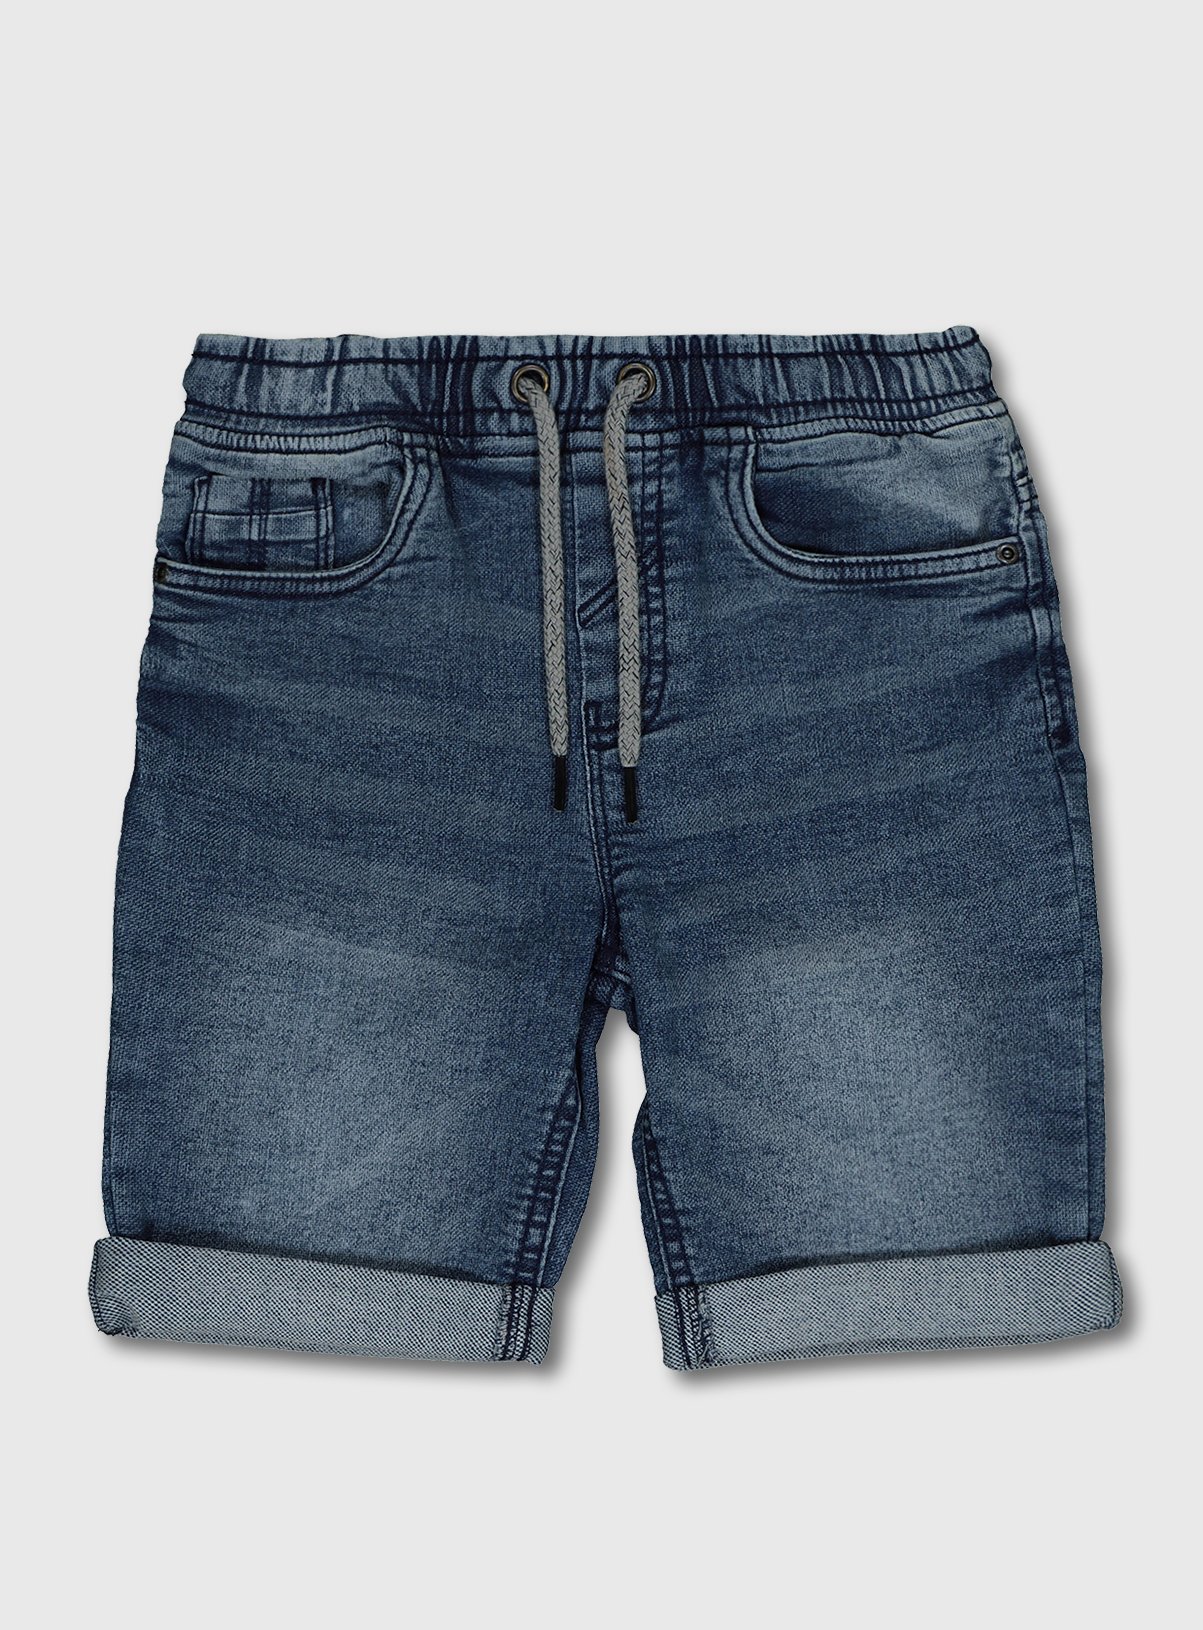 Blue Denim Regular Fit Shorts With Stretch Review